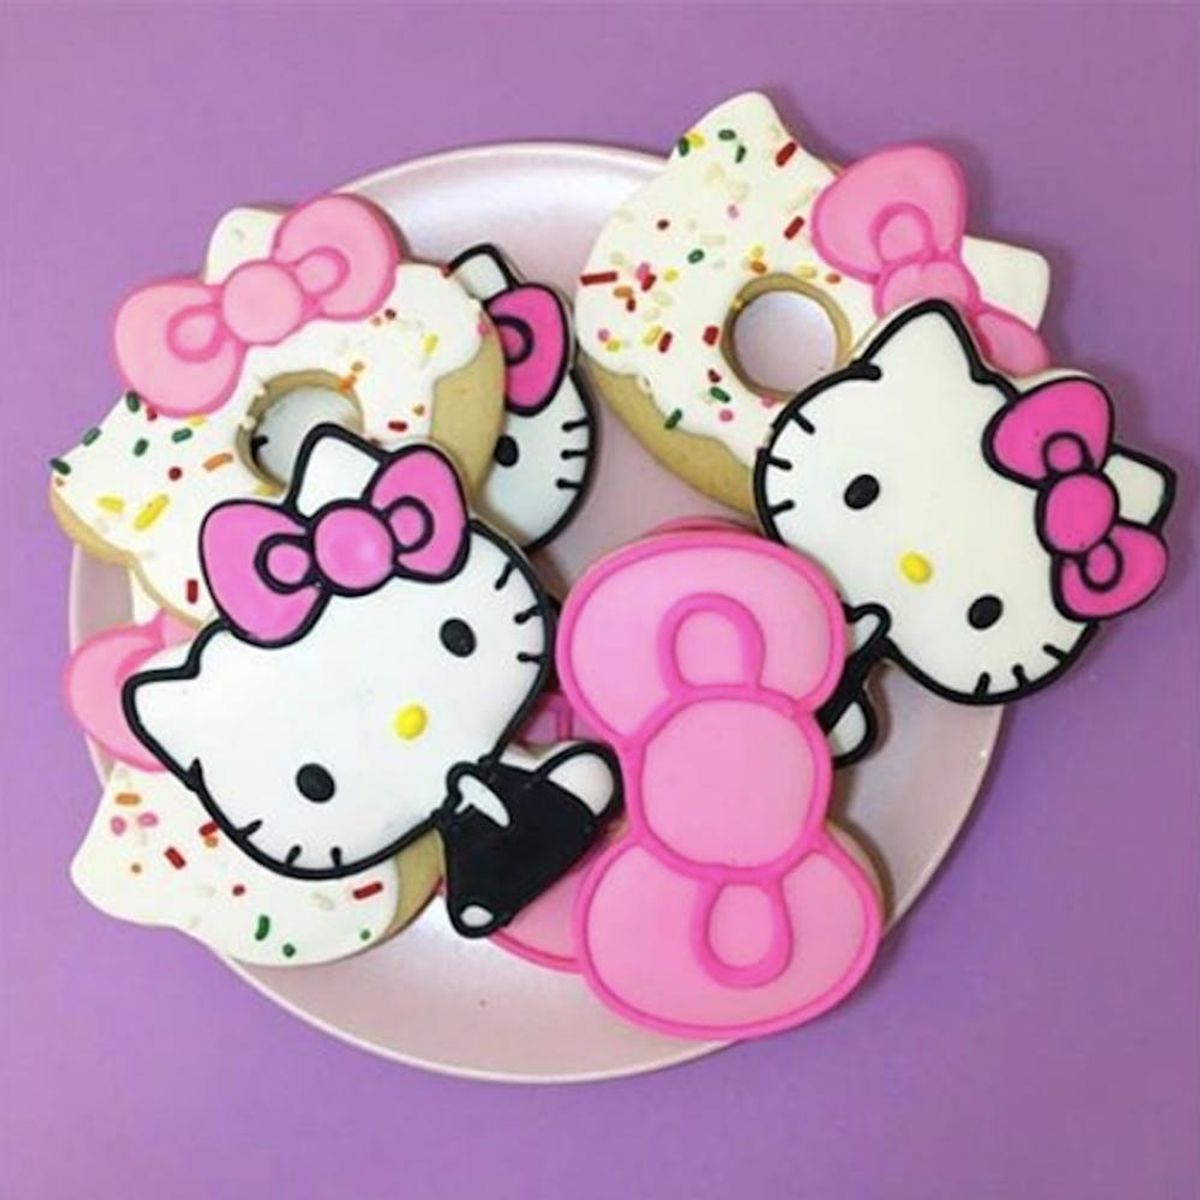 Drop Everything: A Permanent Hello Kitty Cafe Has Just Arrived in California